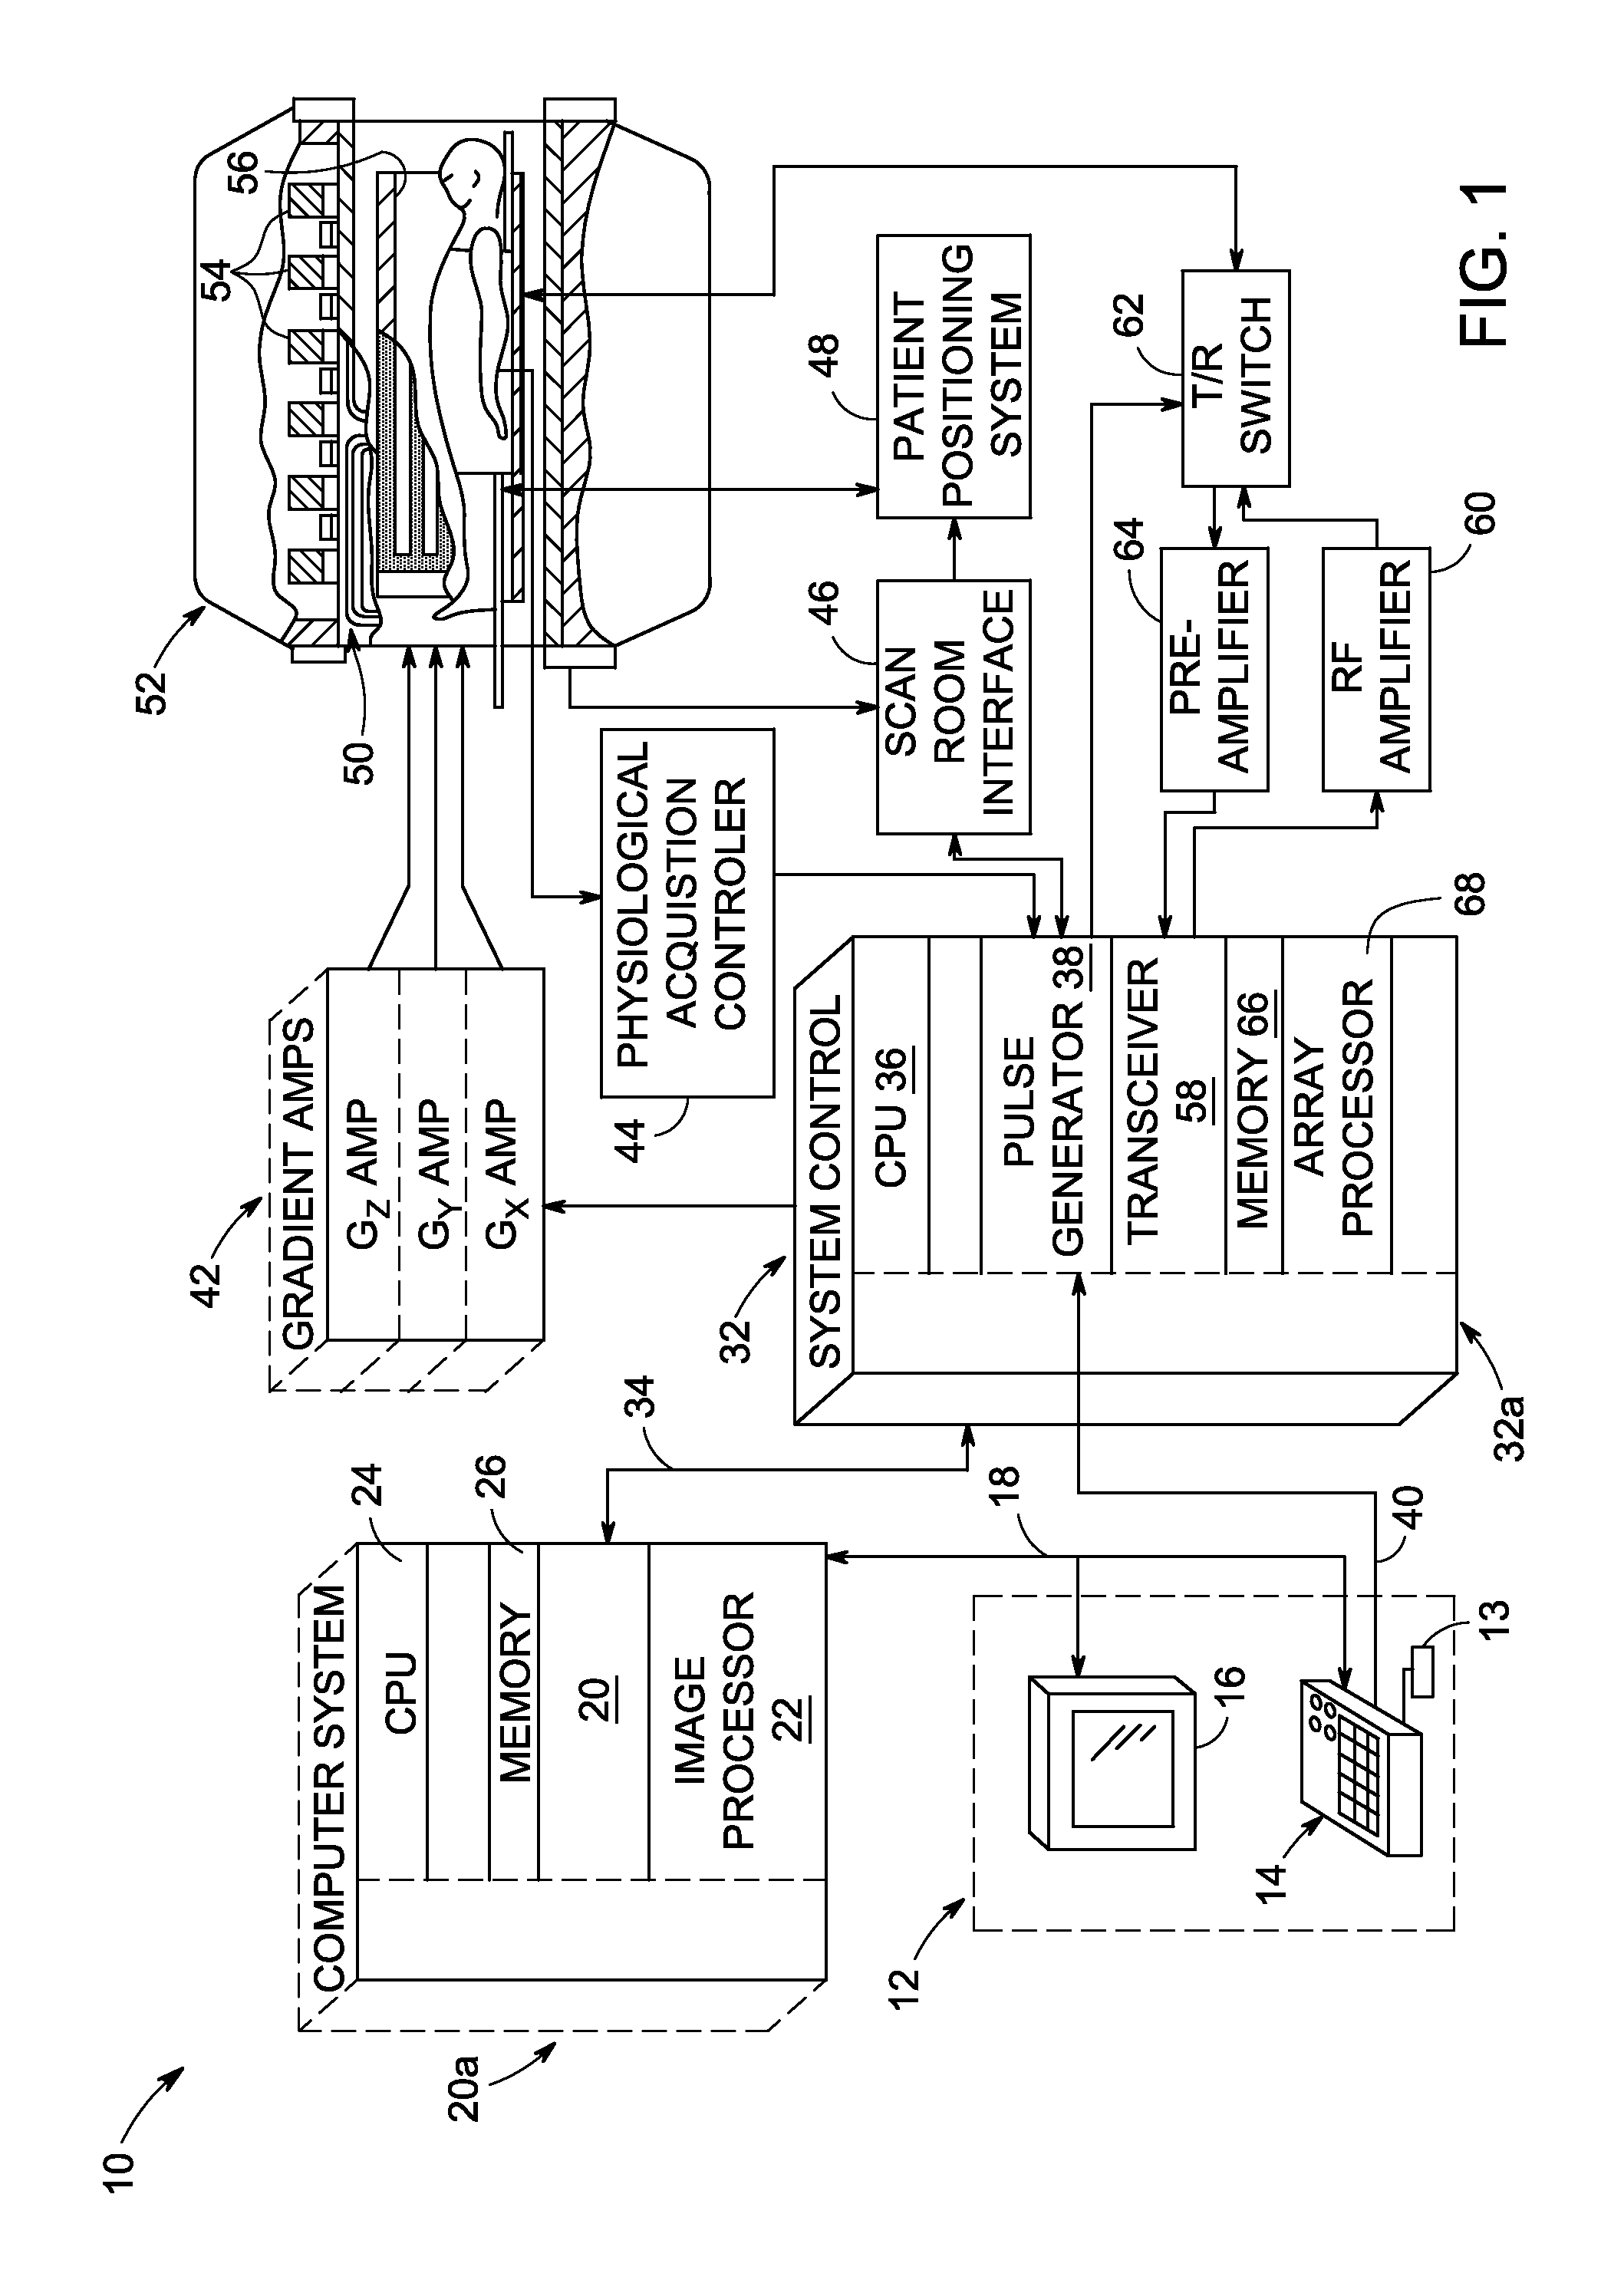 System and method for double inversion recovery for reduction of t1 contribution to fluid-attenuated inversion recovery imaging